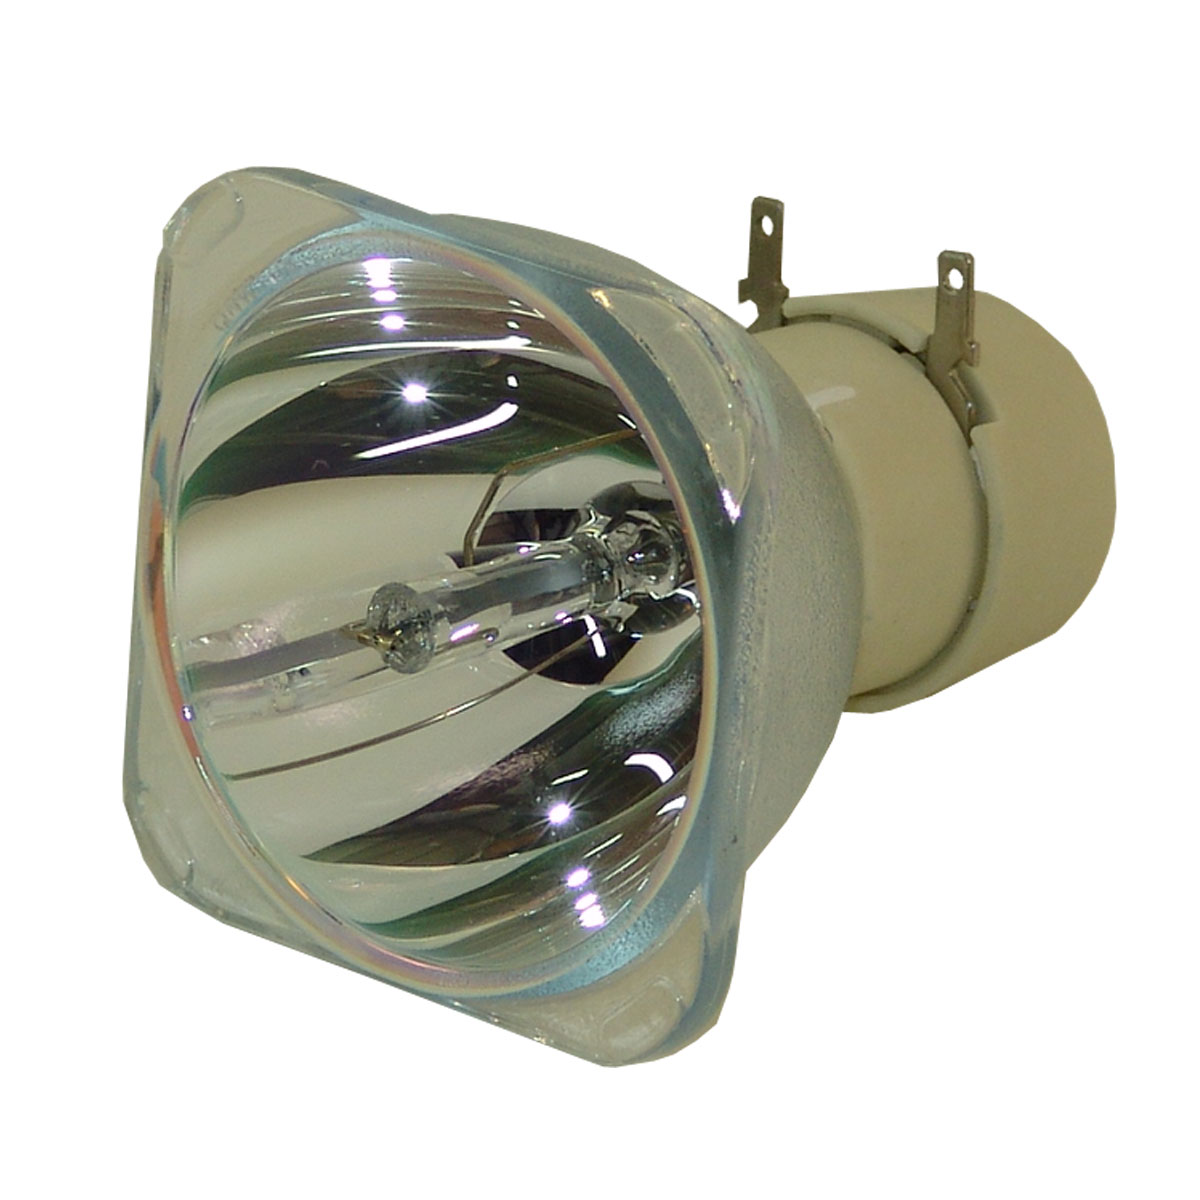 MX570 BenQ Projector Lamp Replacement Projector Lamp Assembly with Genuine Original Philips UHP Bulb Inside.